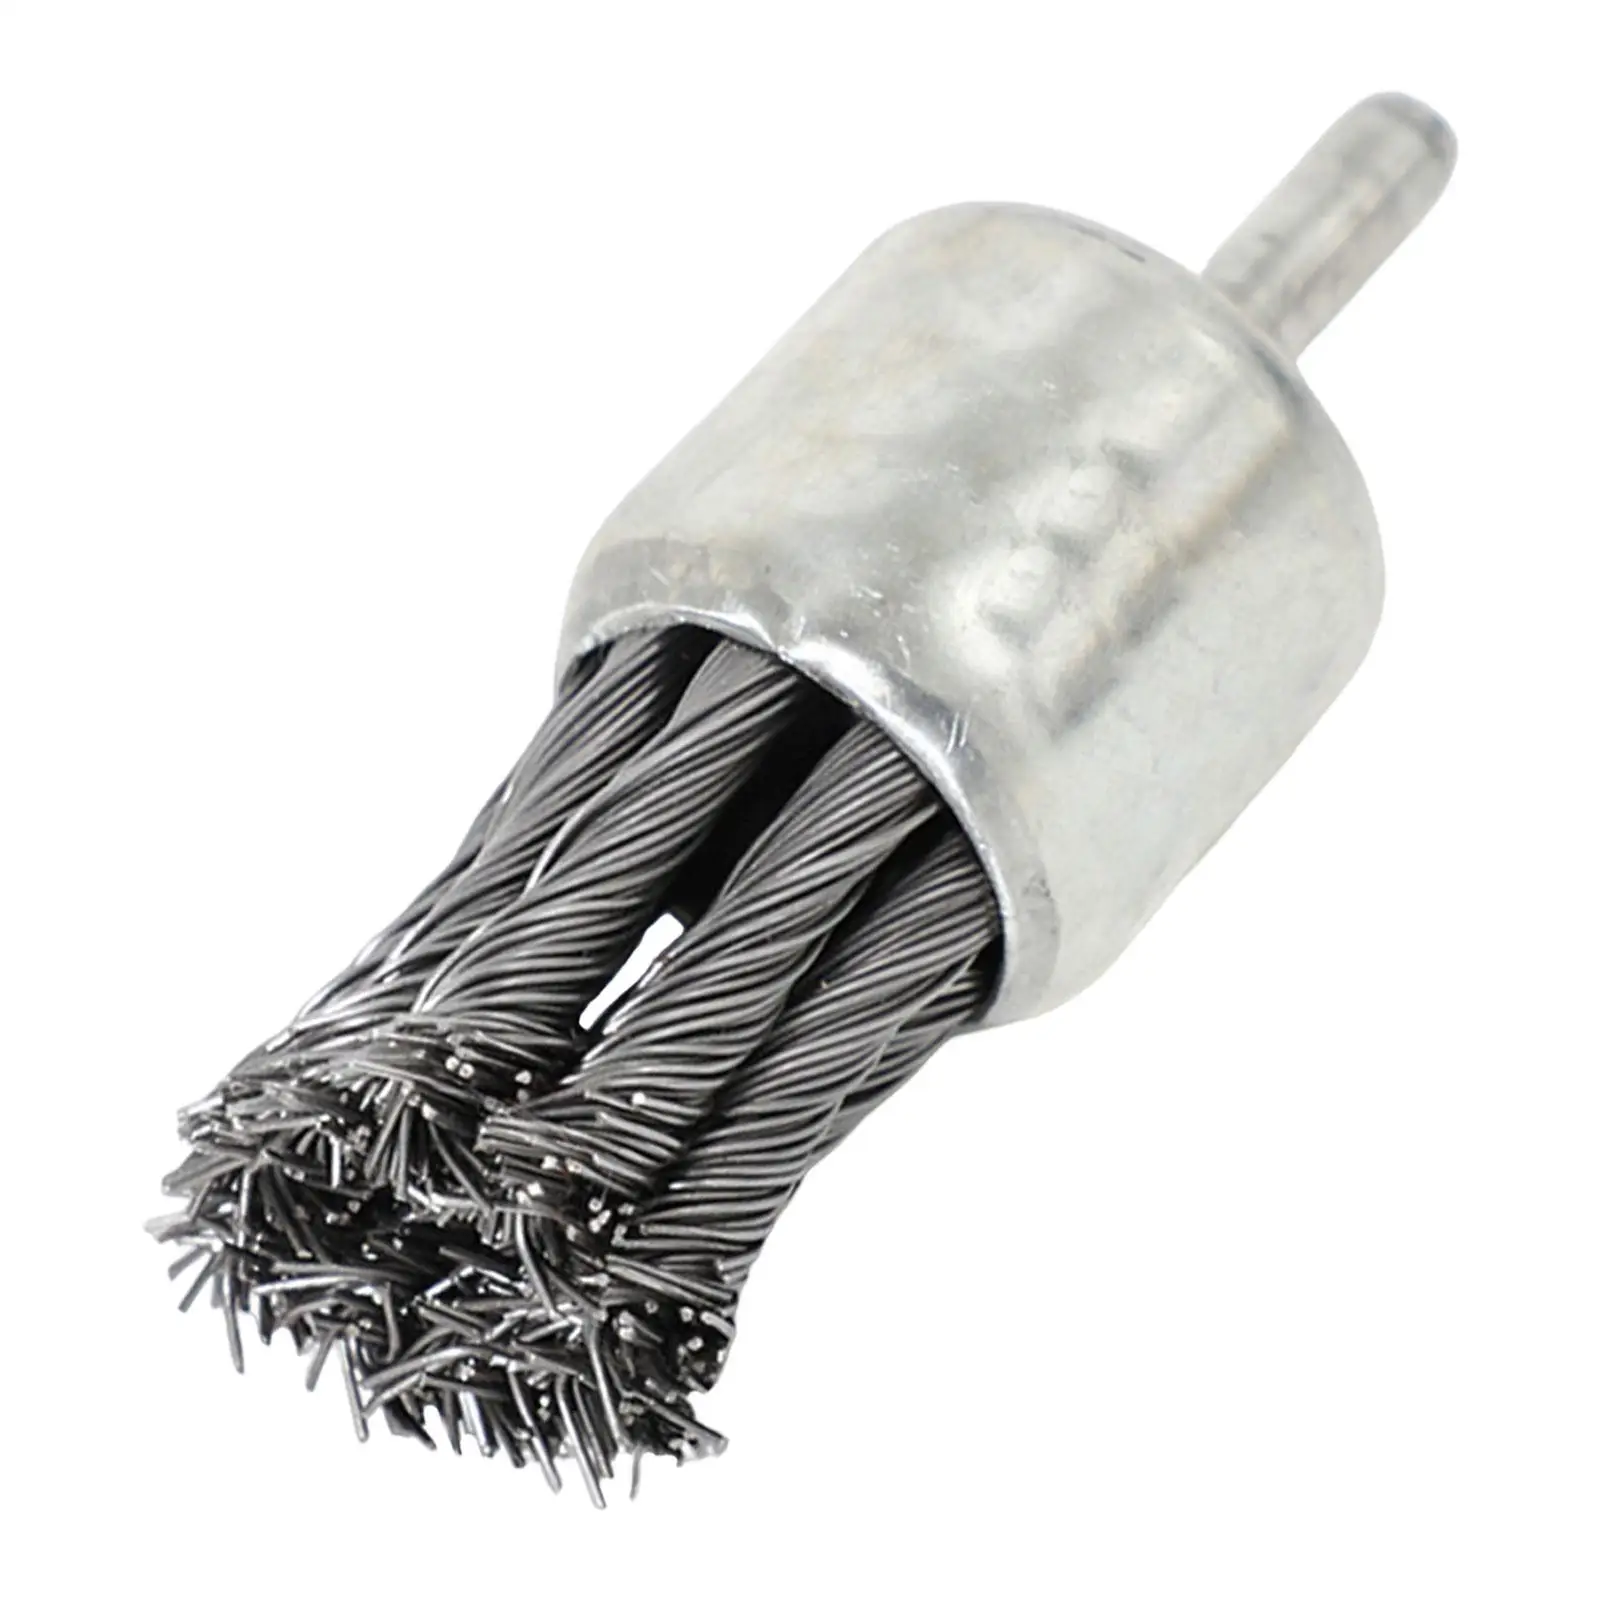 Knot Wire End Brush Gadget Rotary Steel Drill Attachment Rust Removal Replacement Metal Derusting Brush for Drill